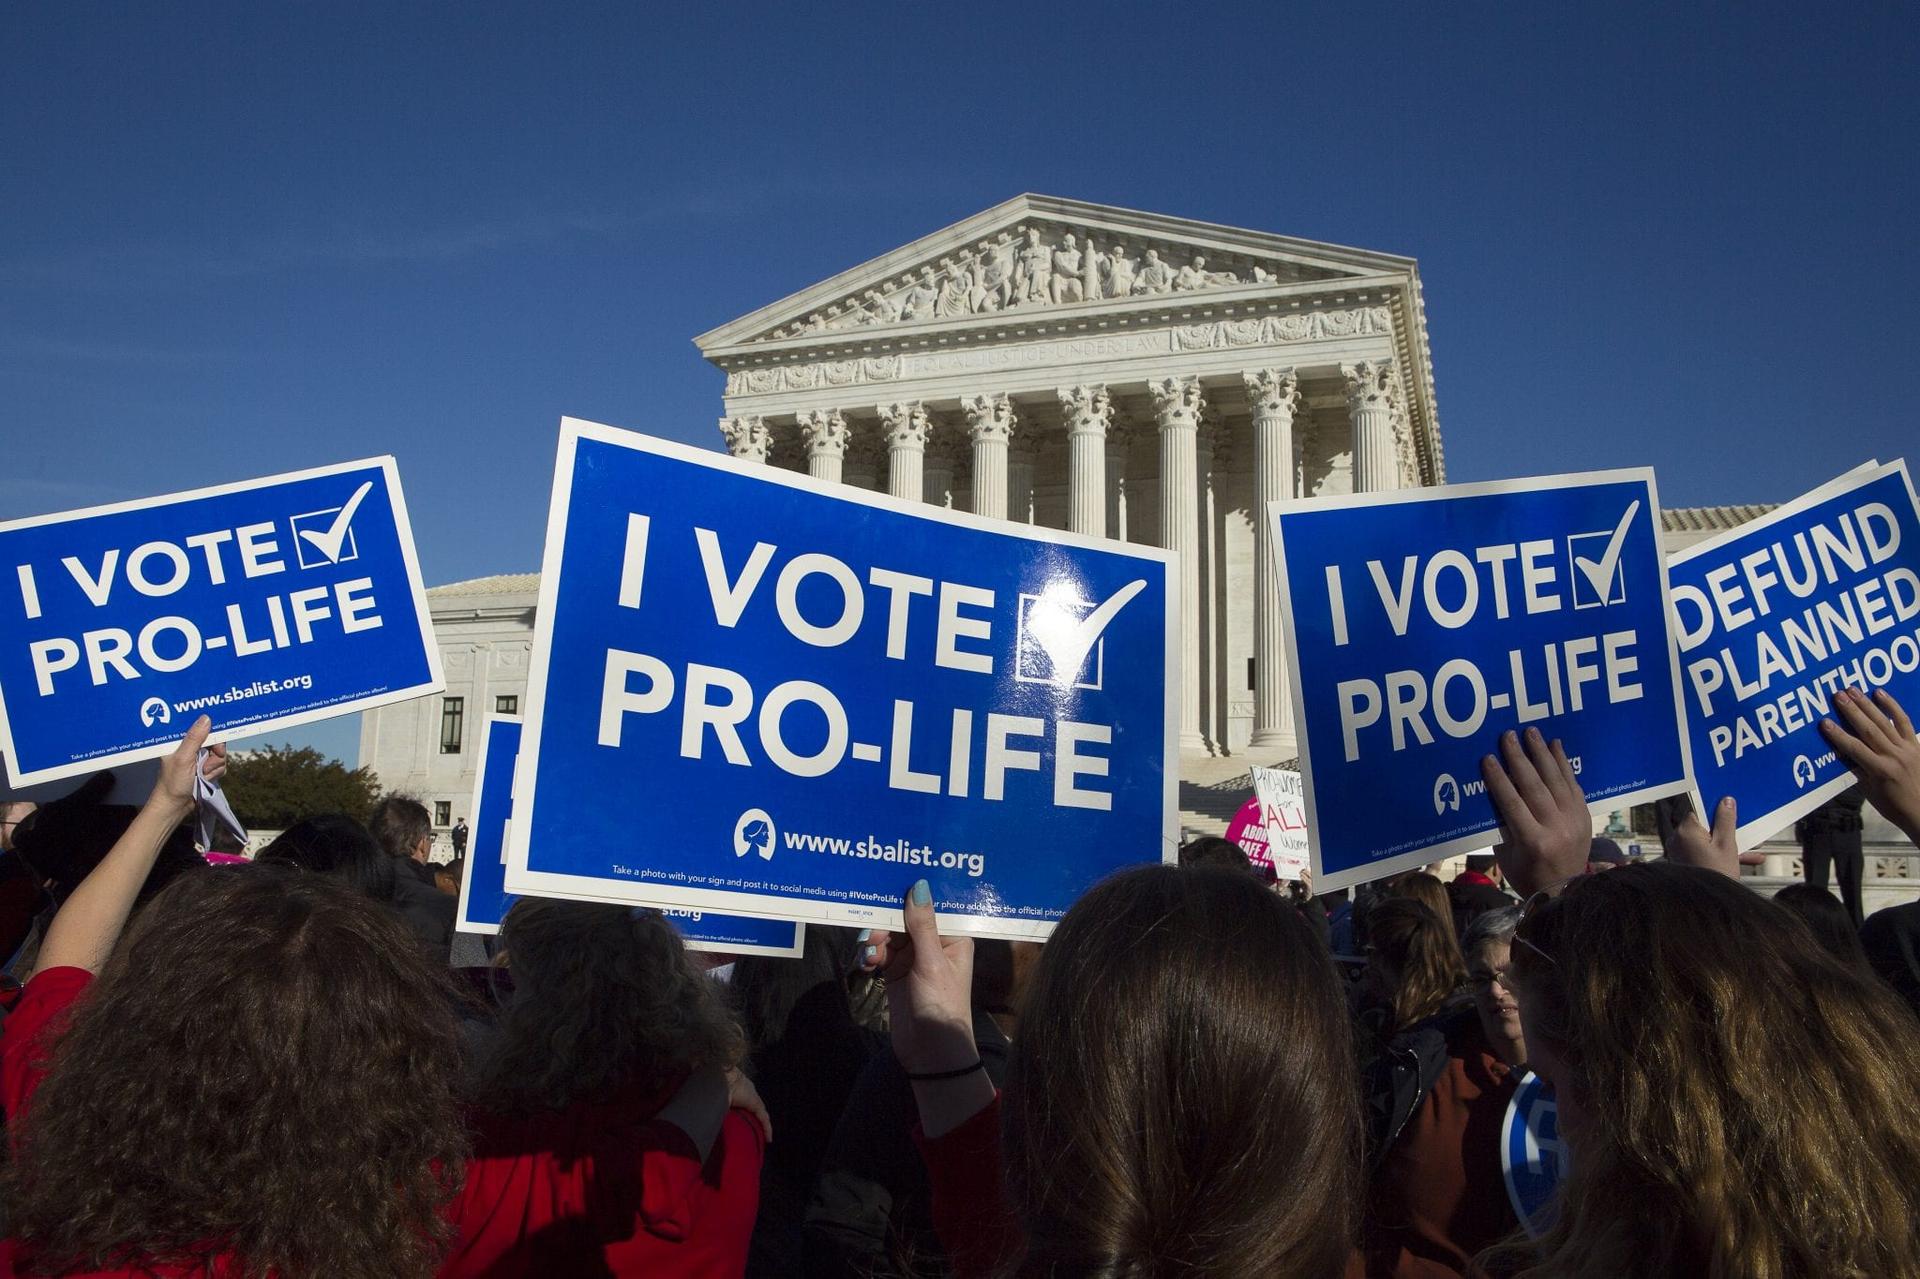 Pro-life community debate prudence of new anti-abortion laws